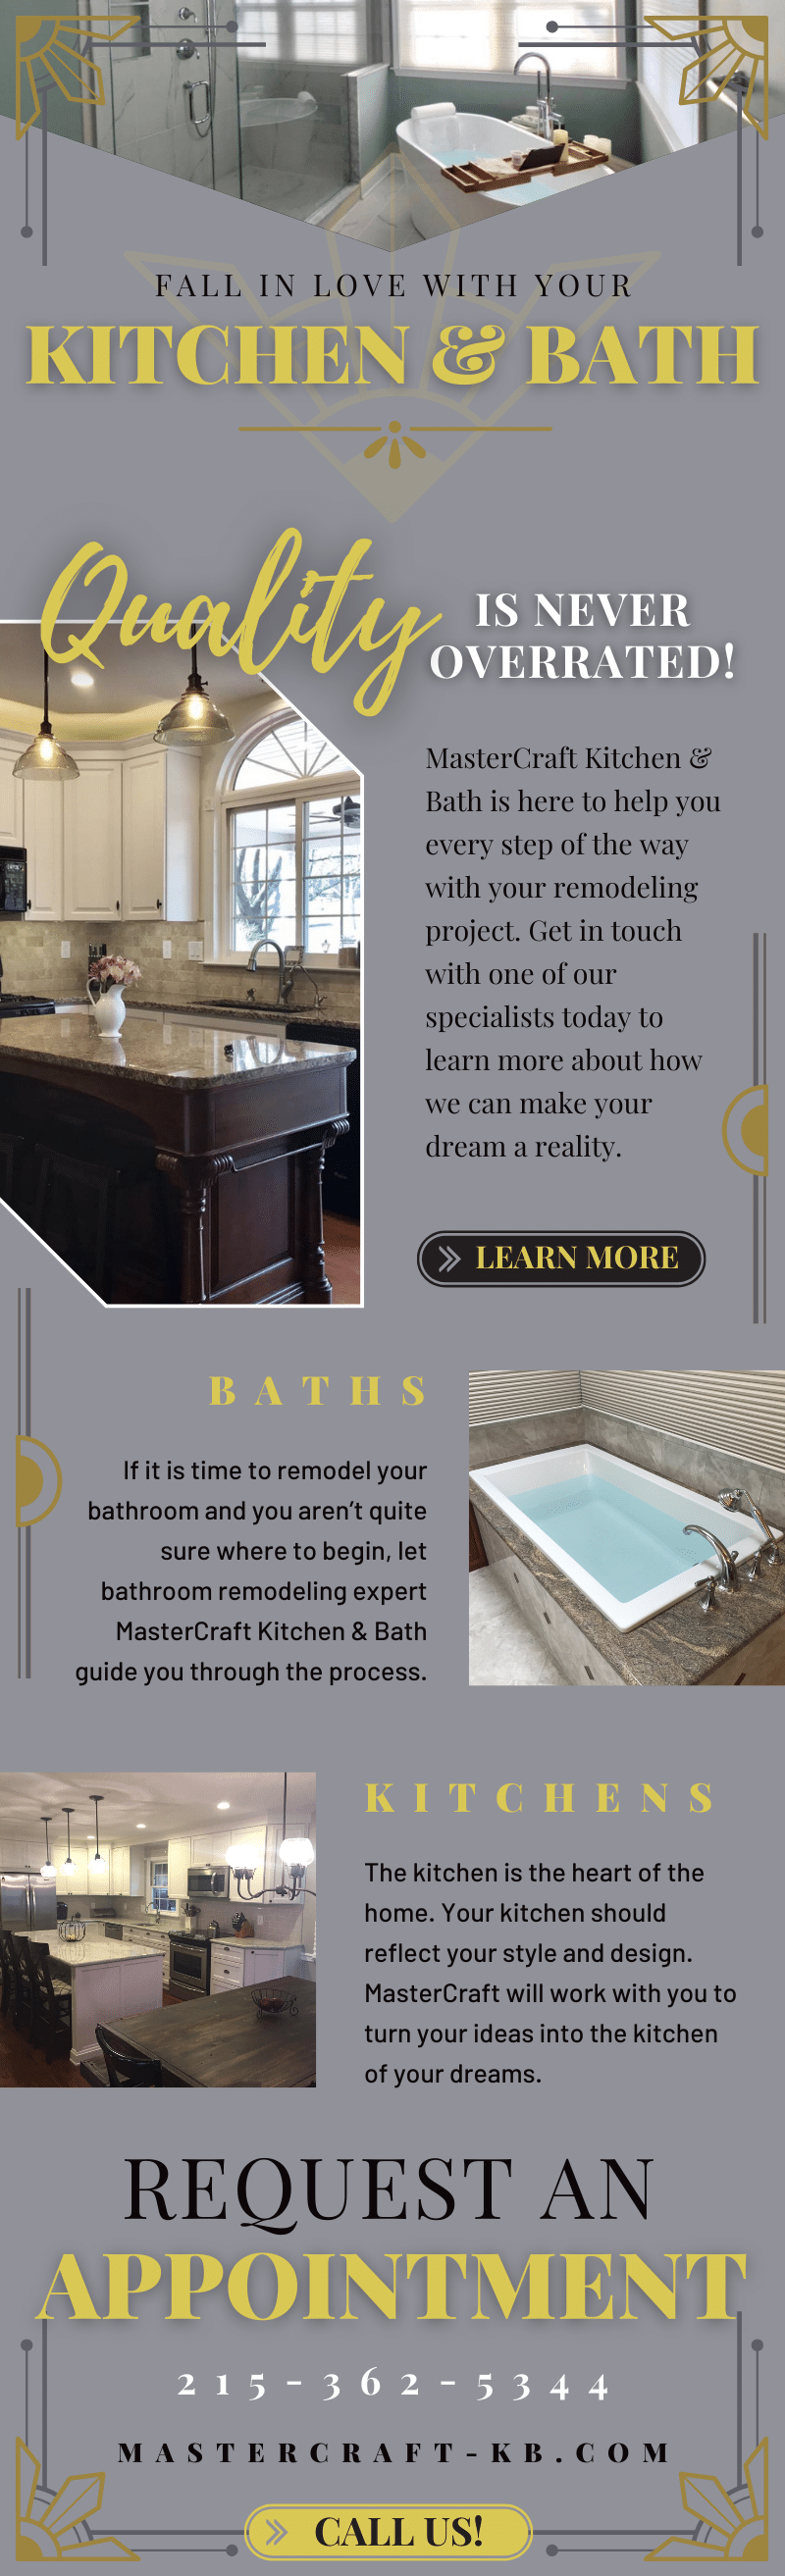 kitchen and bath infographic